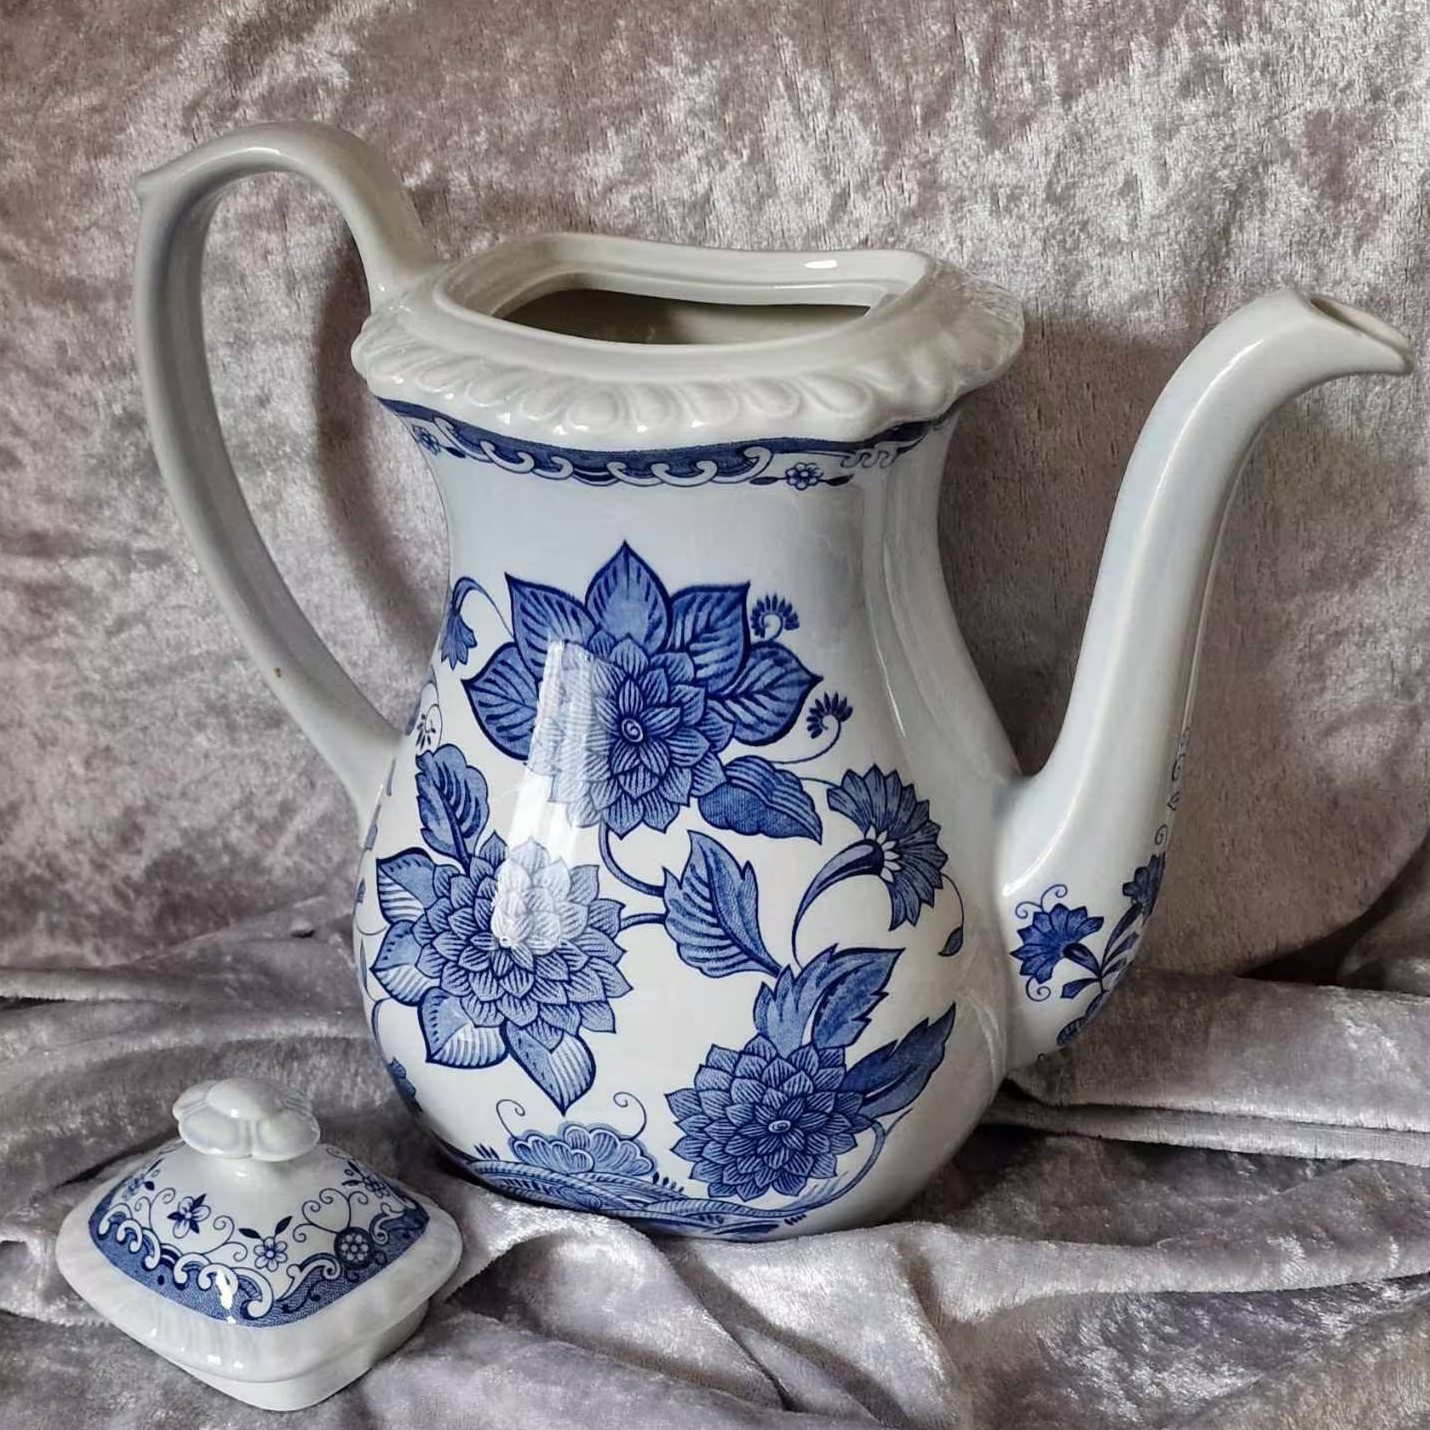 Elegant Adams 'Blue Butterfly' porcelain teapot featuring a beautiful blue and white floral pattern.